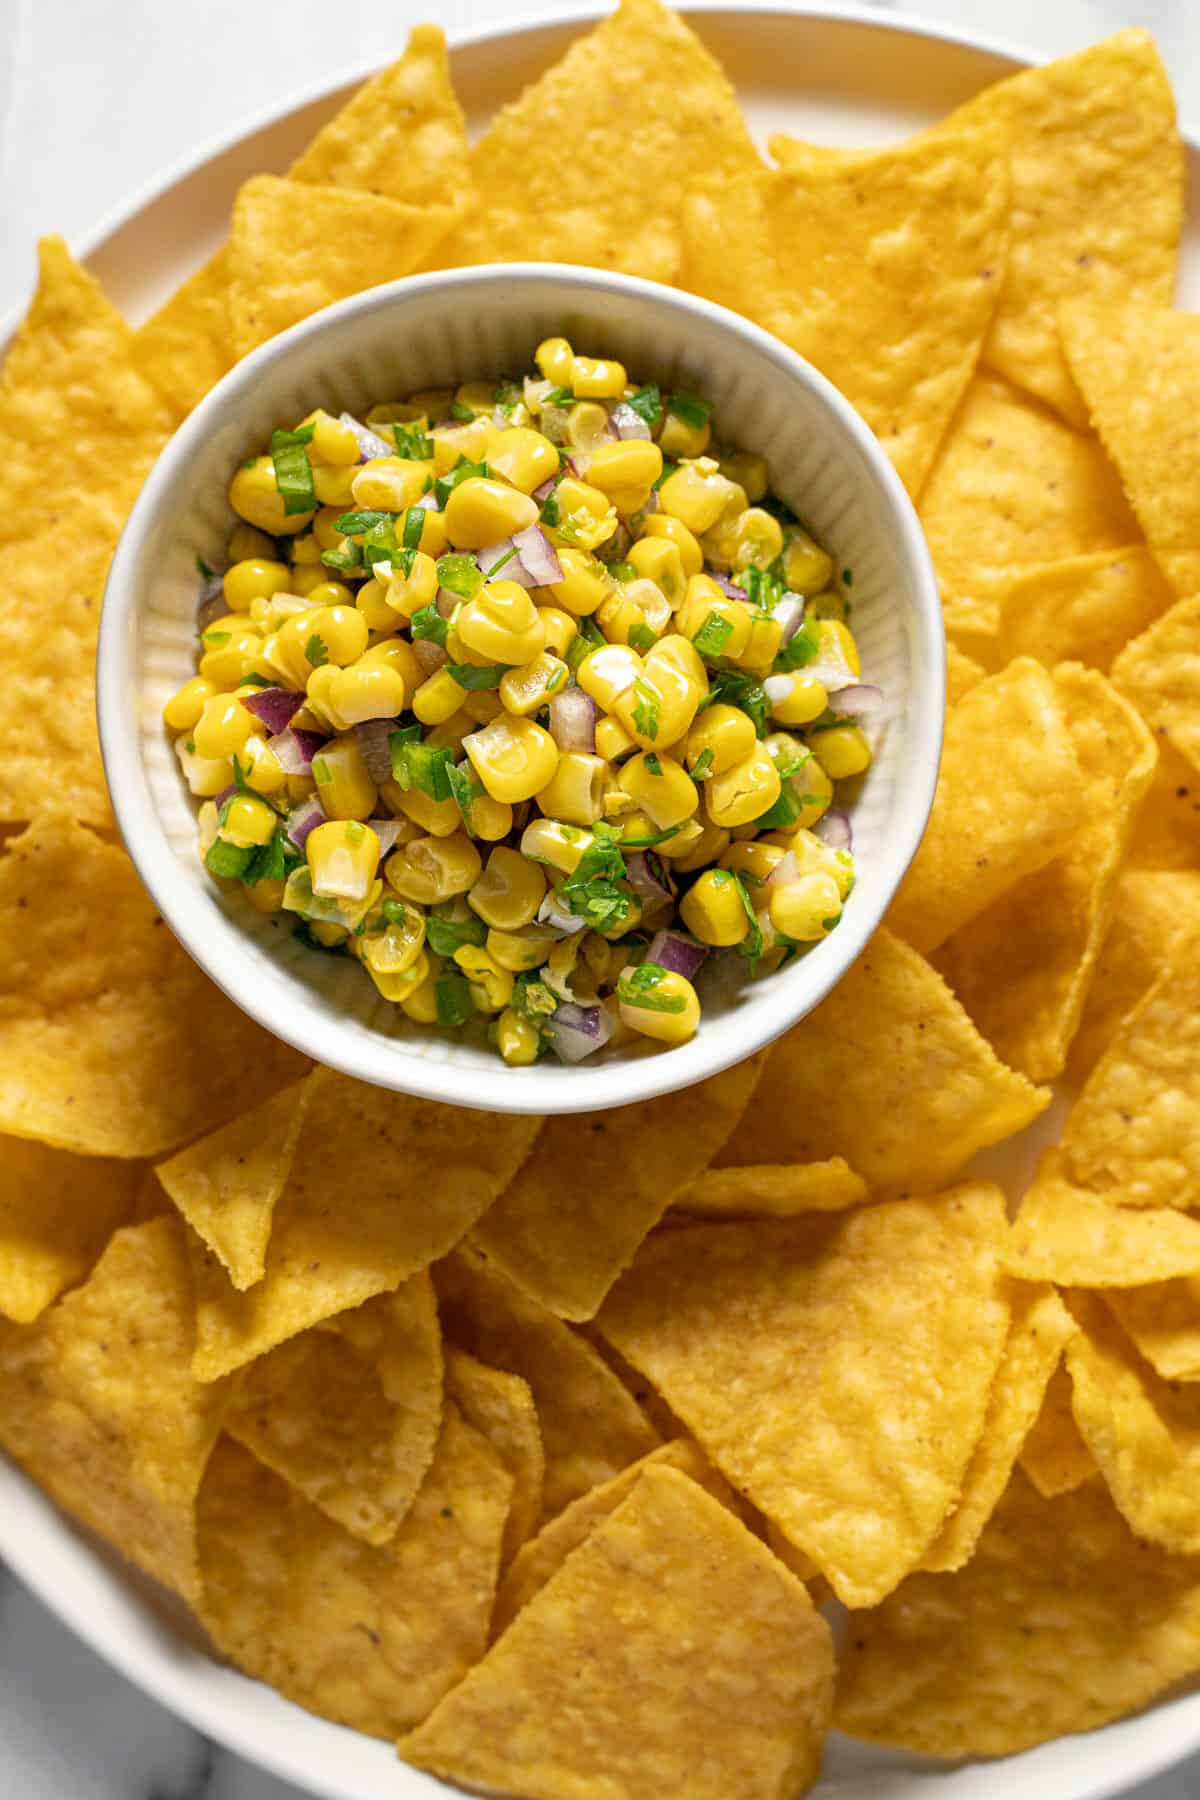 Small white bowl of corn salsa on a plate of tortilla chips.